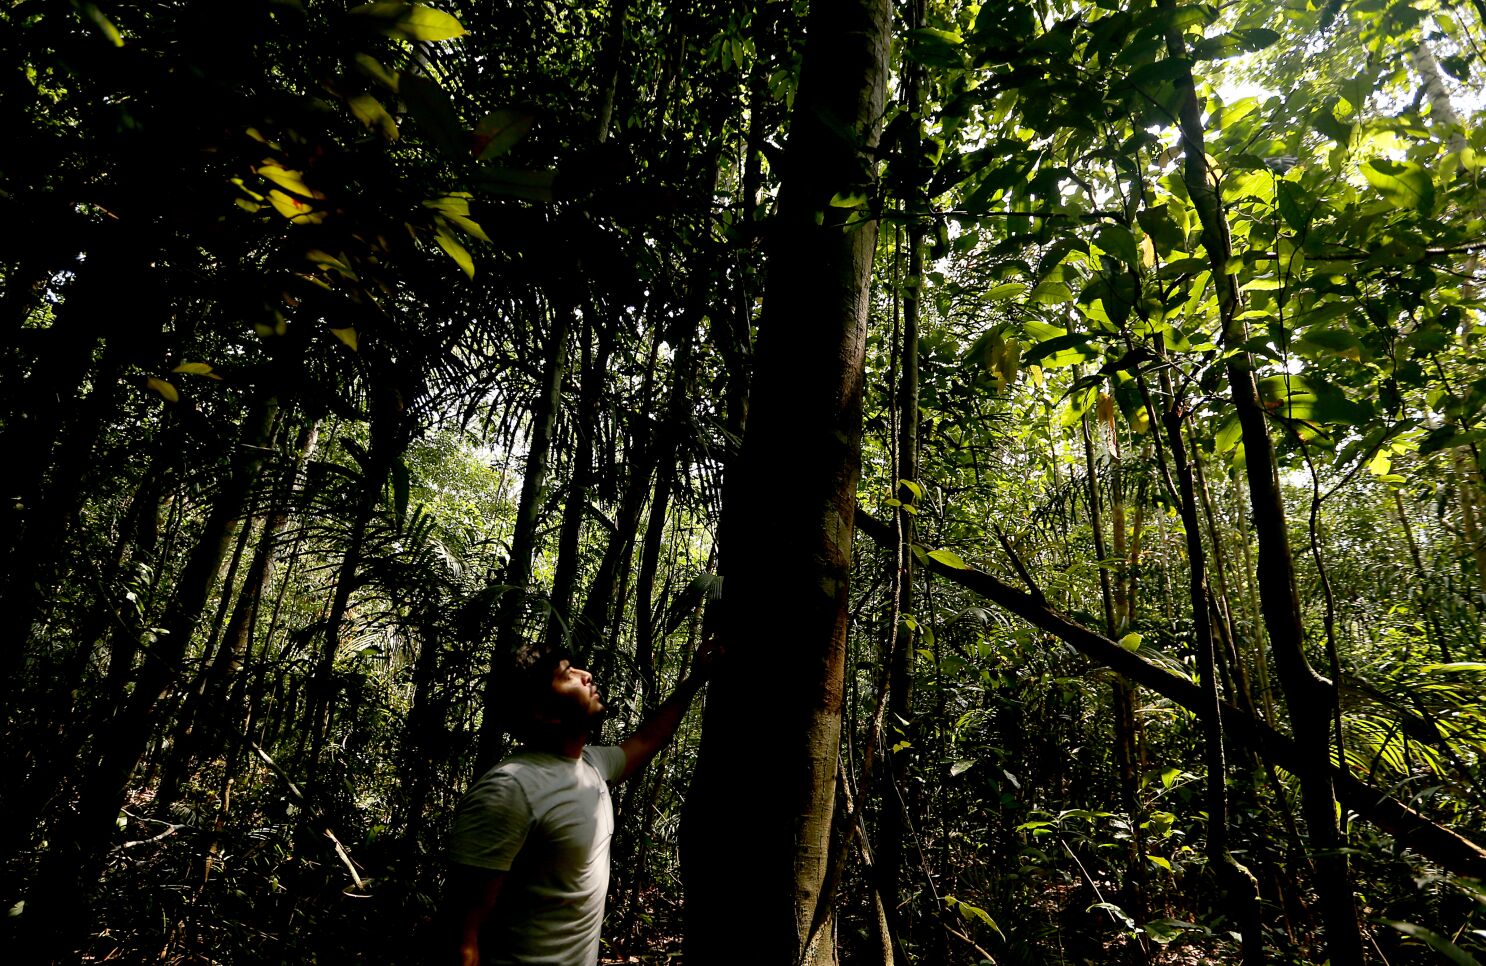 at the edge Amazon rainforest - Los Angeles Times